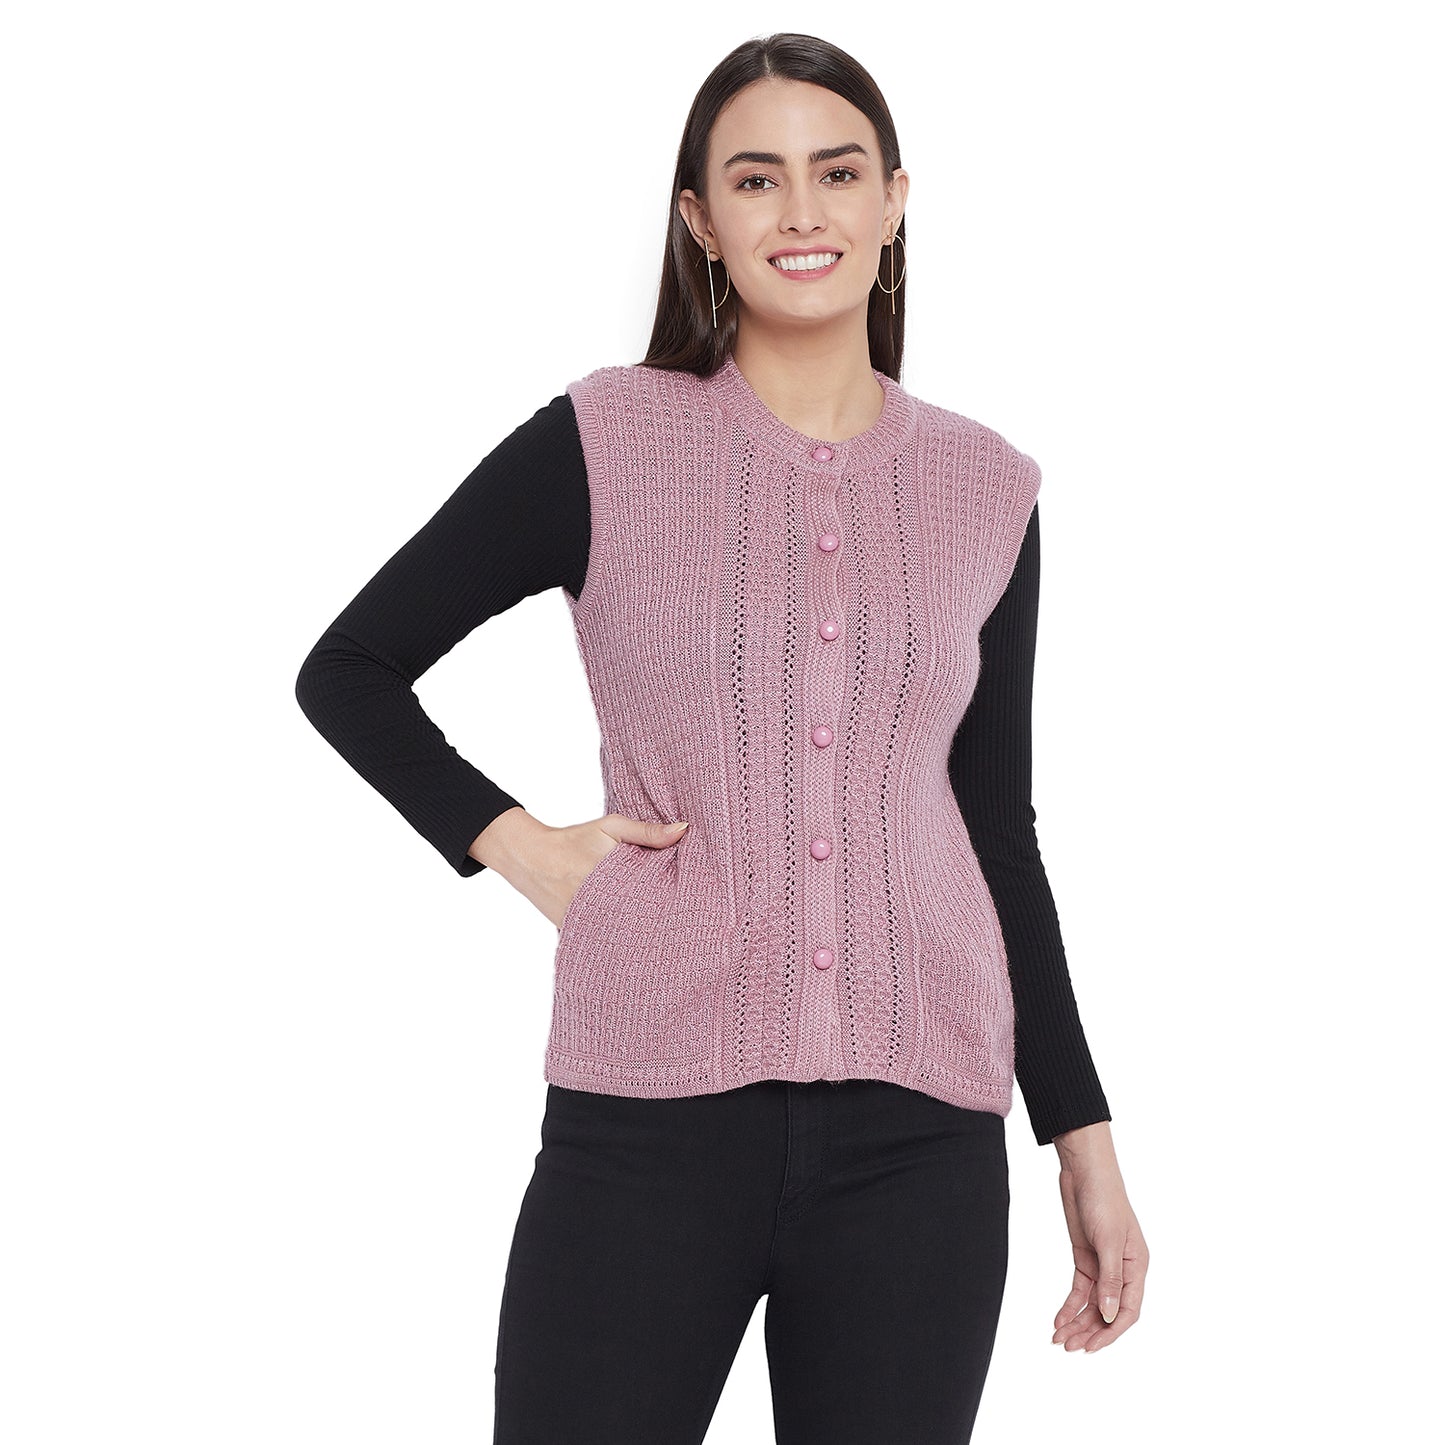 Clapton Acrylic Blend Round Neck Full Sleeve Casual Solid Winter Wear Cardigans For Women Pink